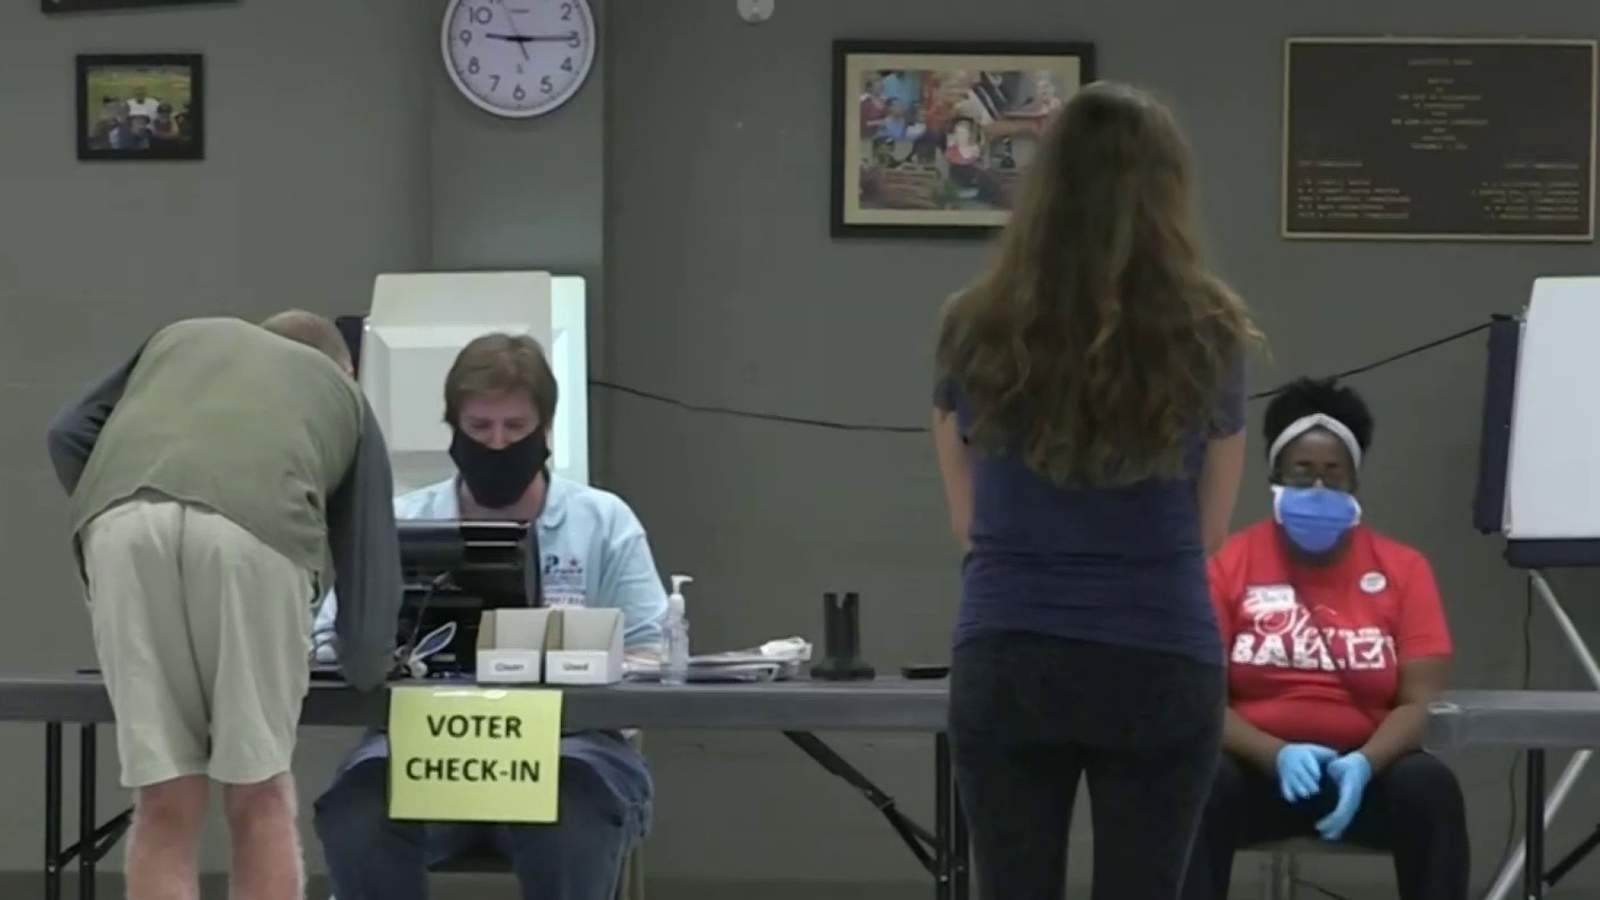 Poll watchers must be approved by local supervisor of elections